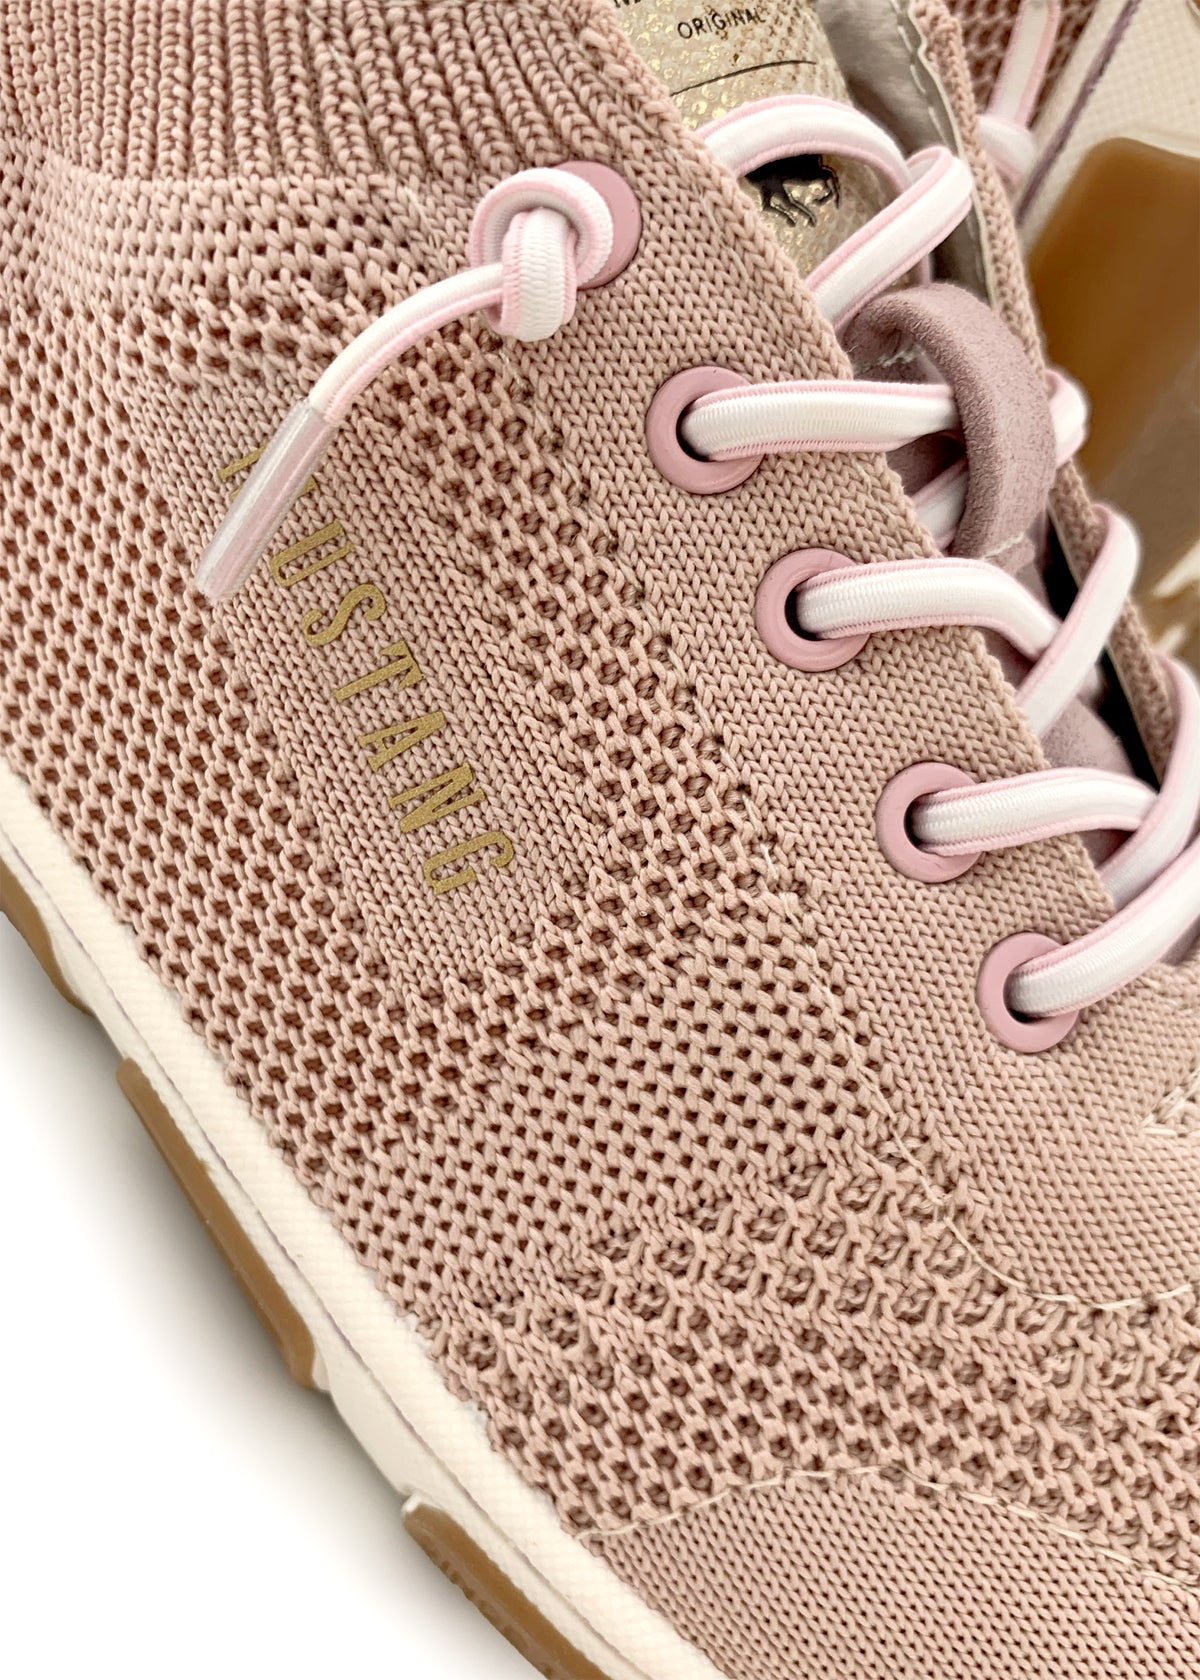 Sneakers with elastic bands - pink textile